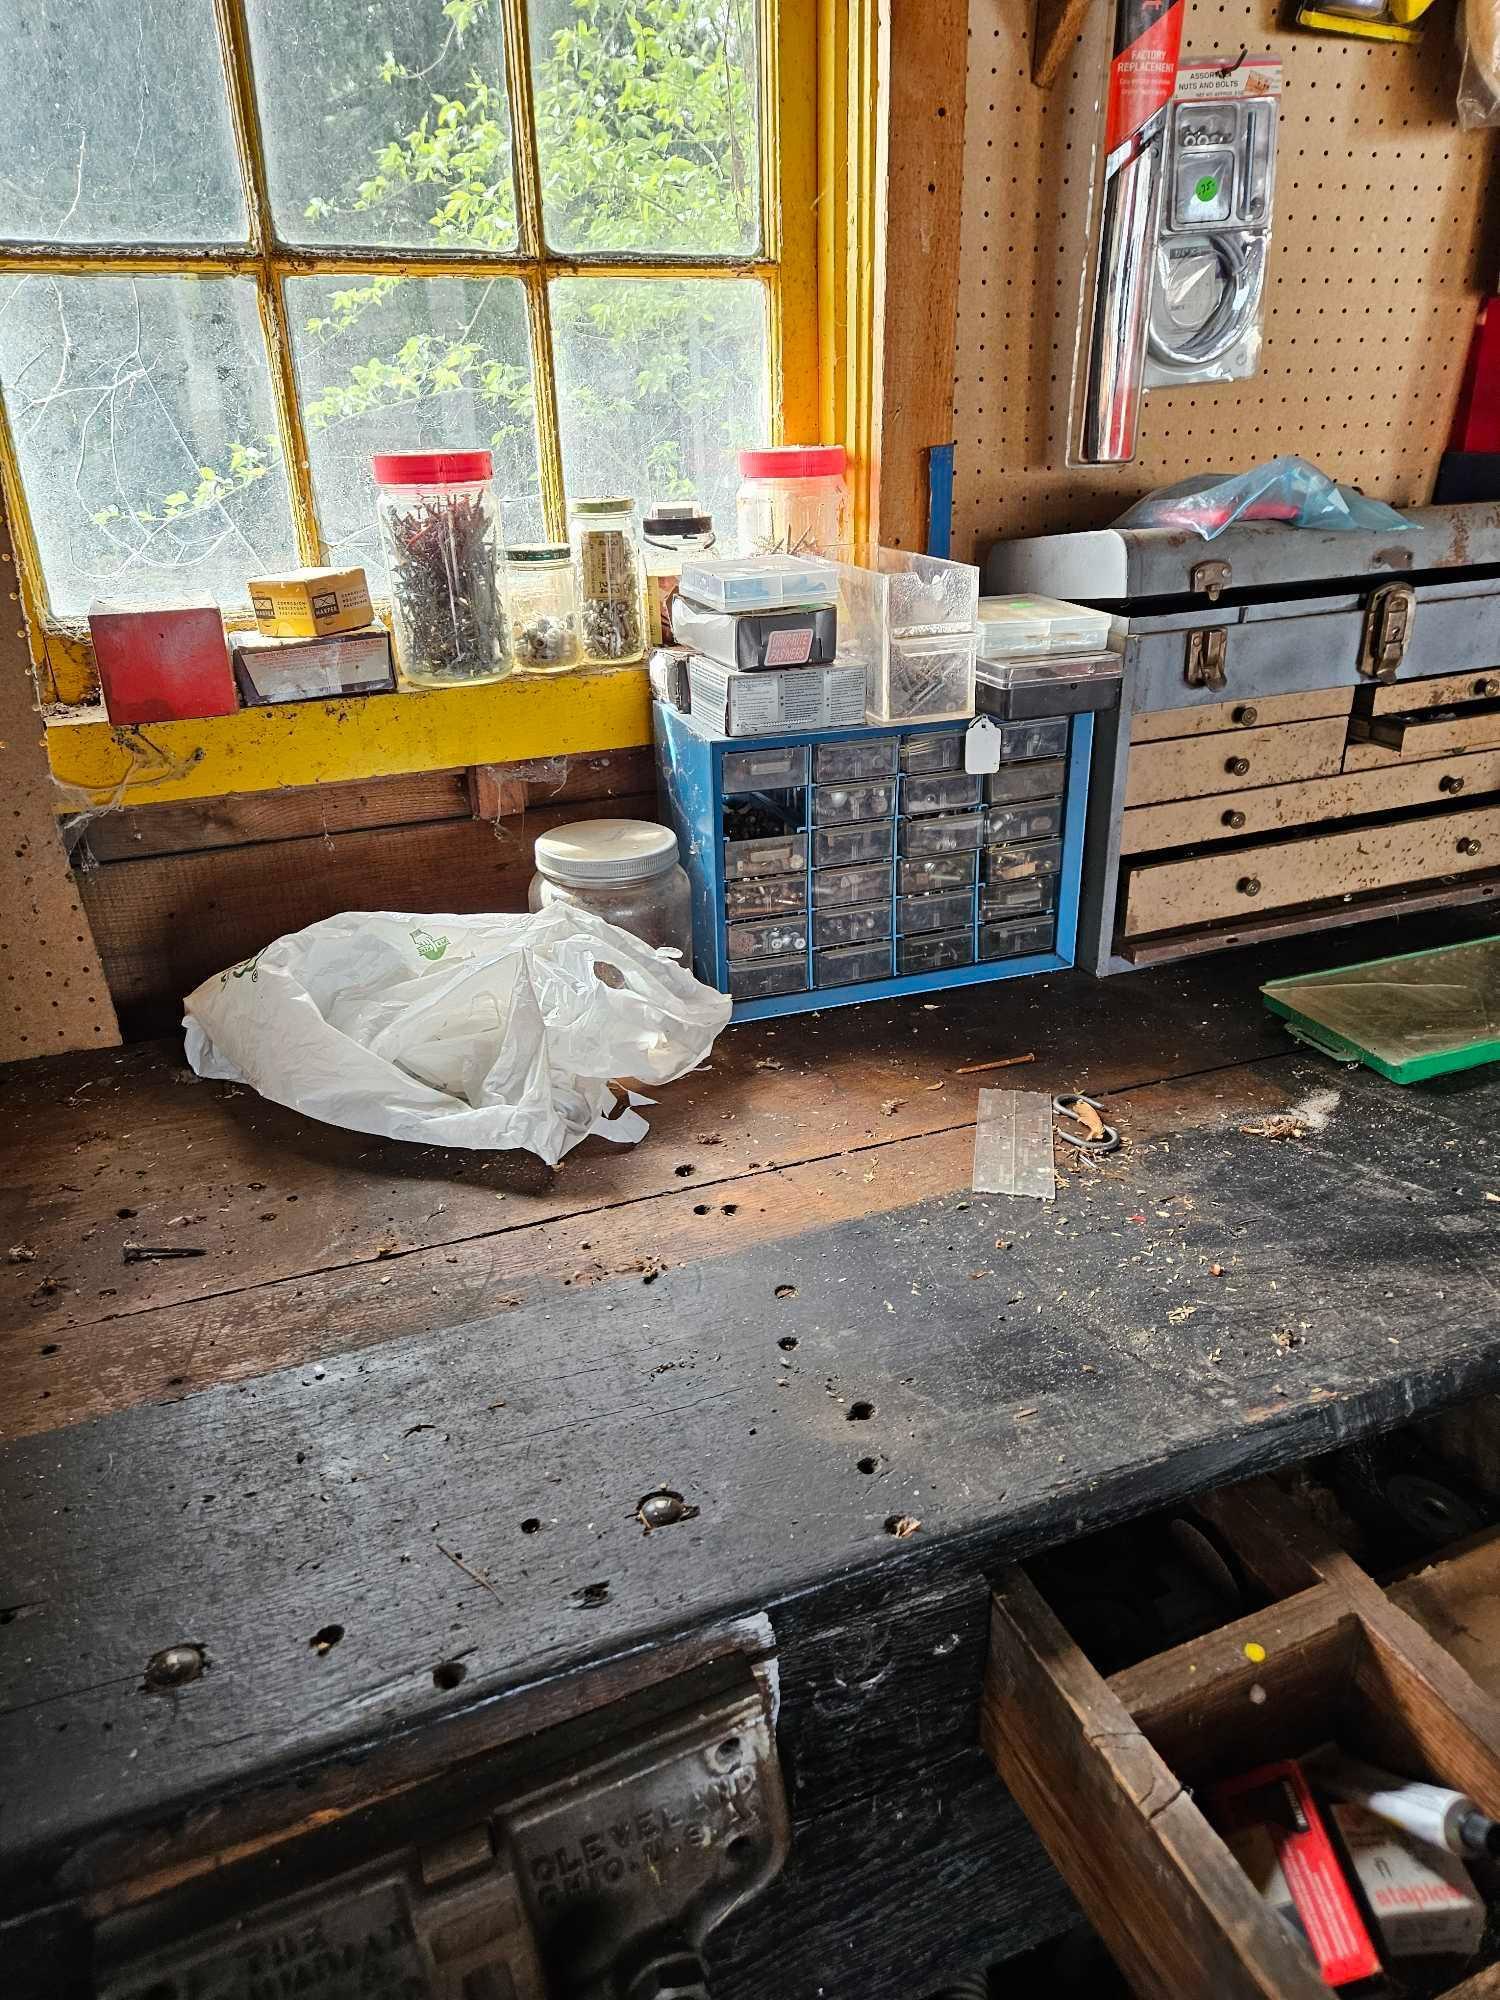 Work bench with contents including vice.